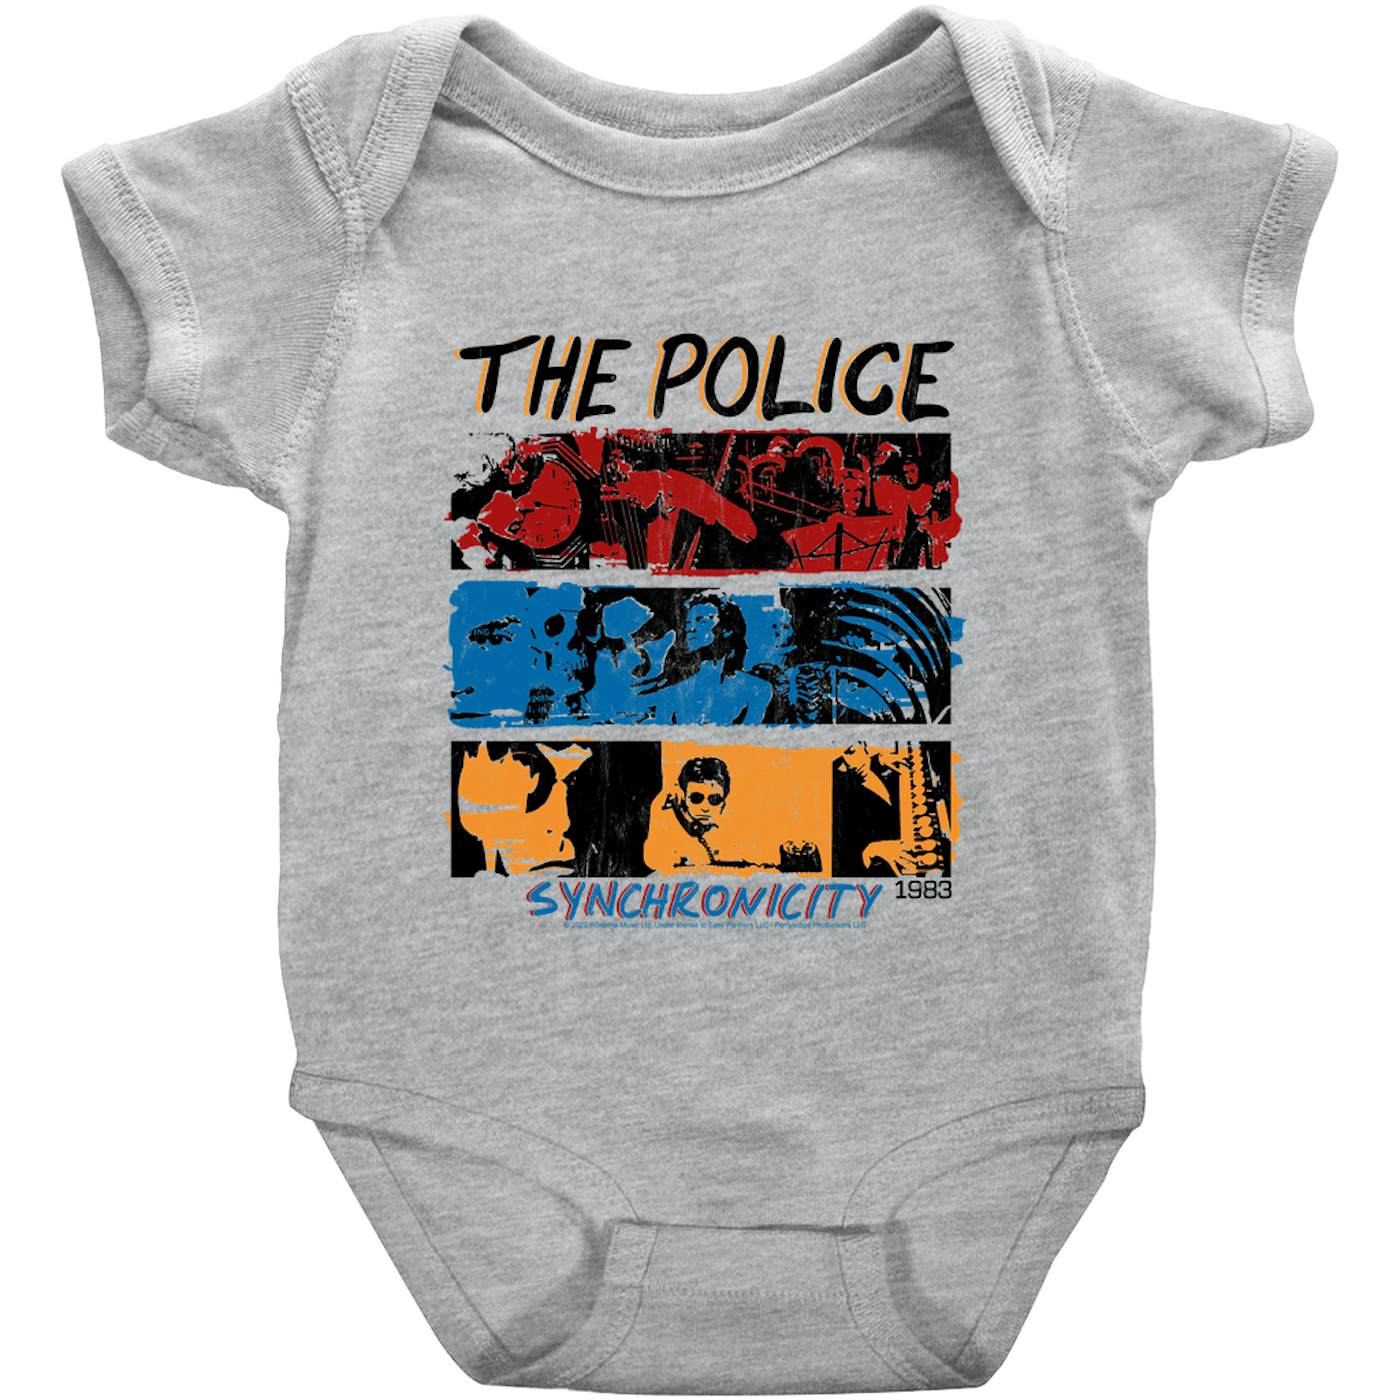 The Police Baby Short Sleeve Bodysuit | 1983 Synchronicity Tour Distressed (Merchbar Exclusive) The Police Bodysuit